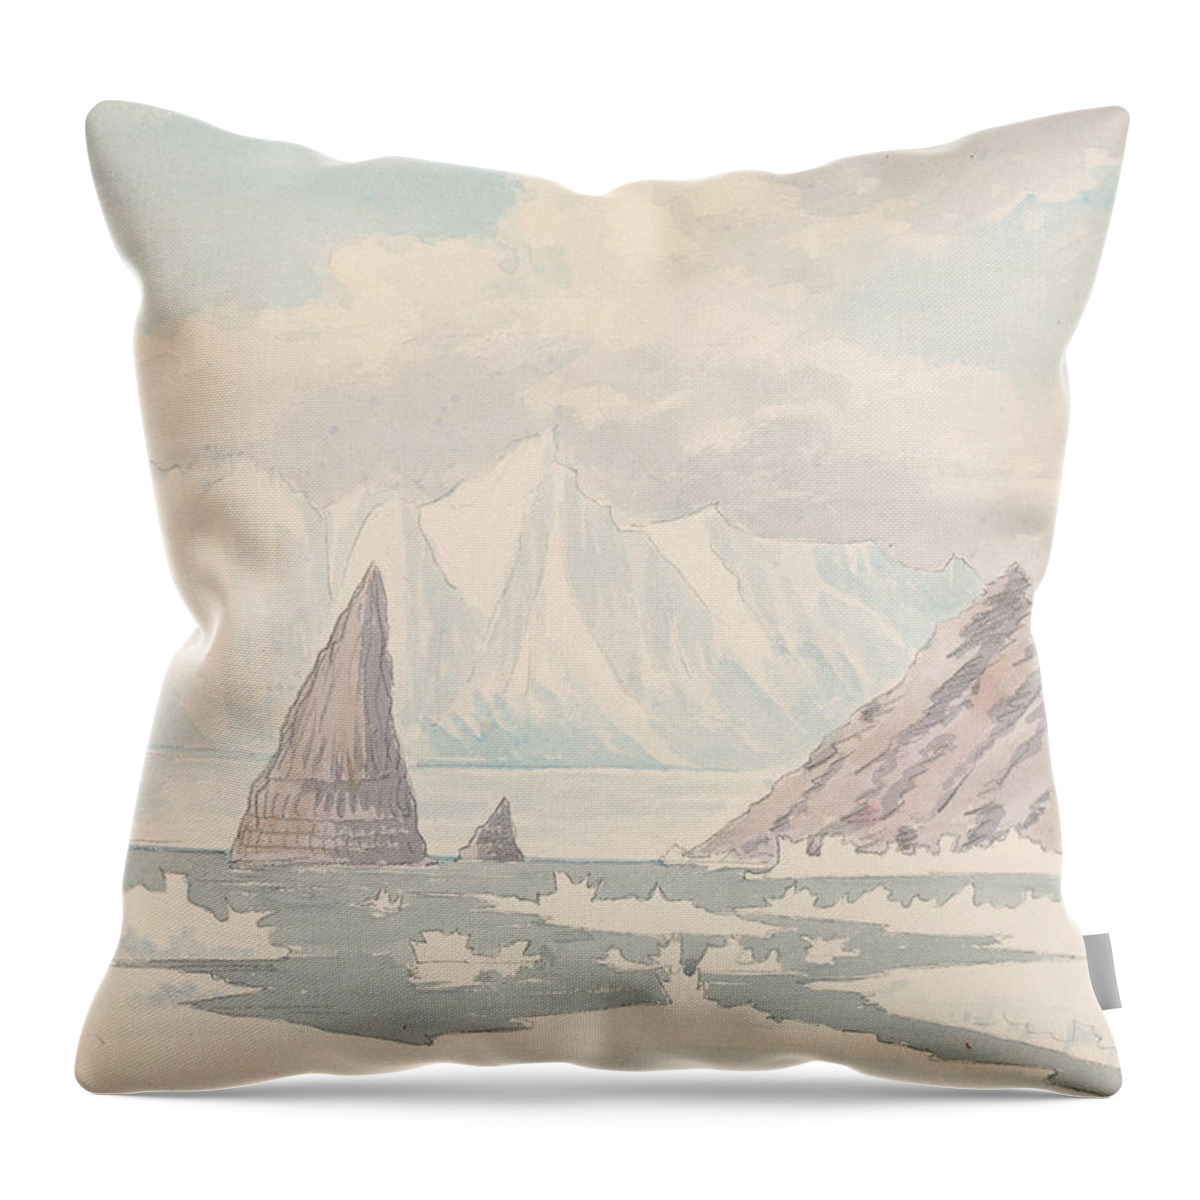 19th Century Throw Pillow featuring the drawing Princess Charlotte's Monument, Coburg Bay by Charles Hamilton Smith